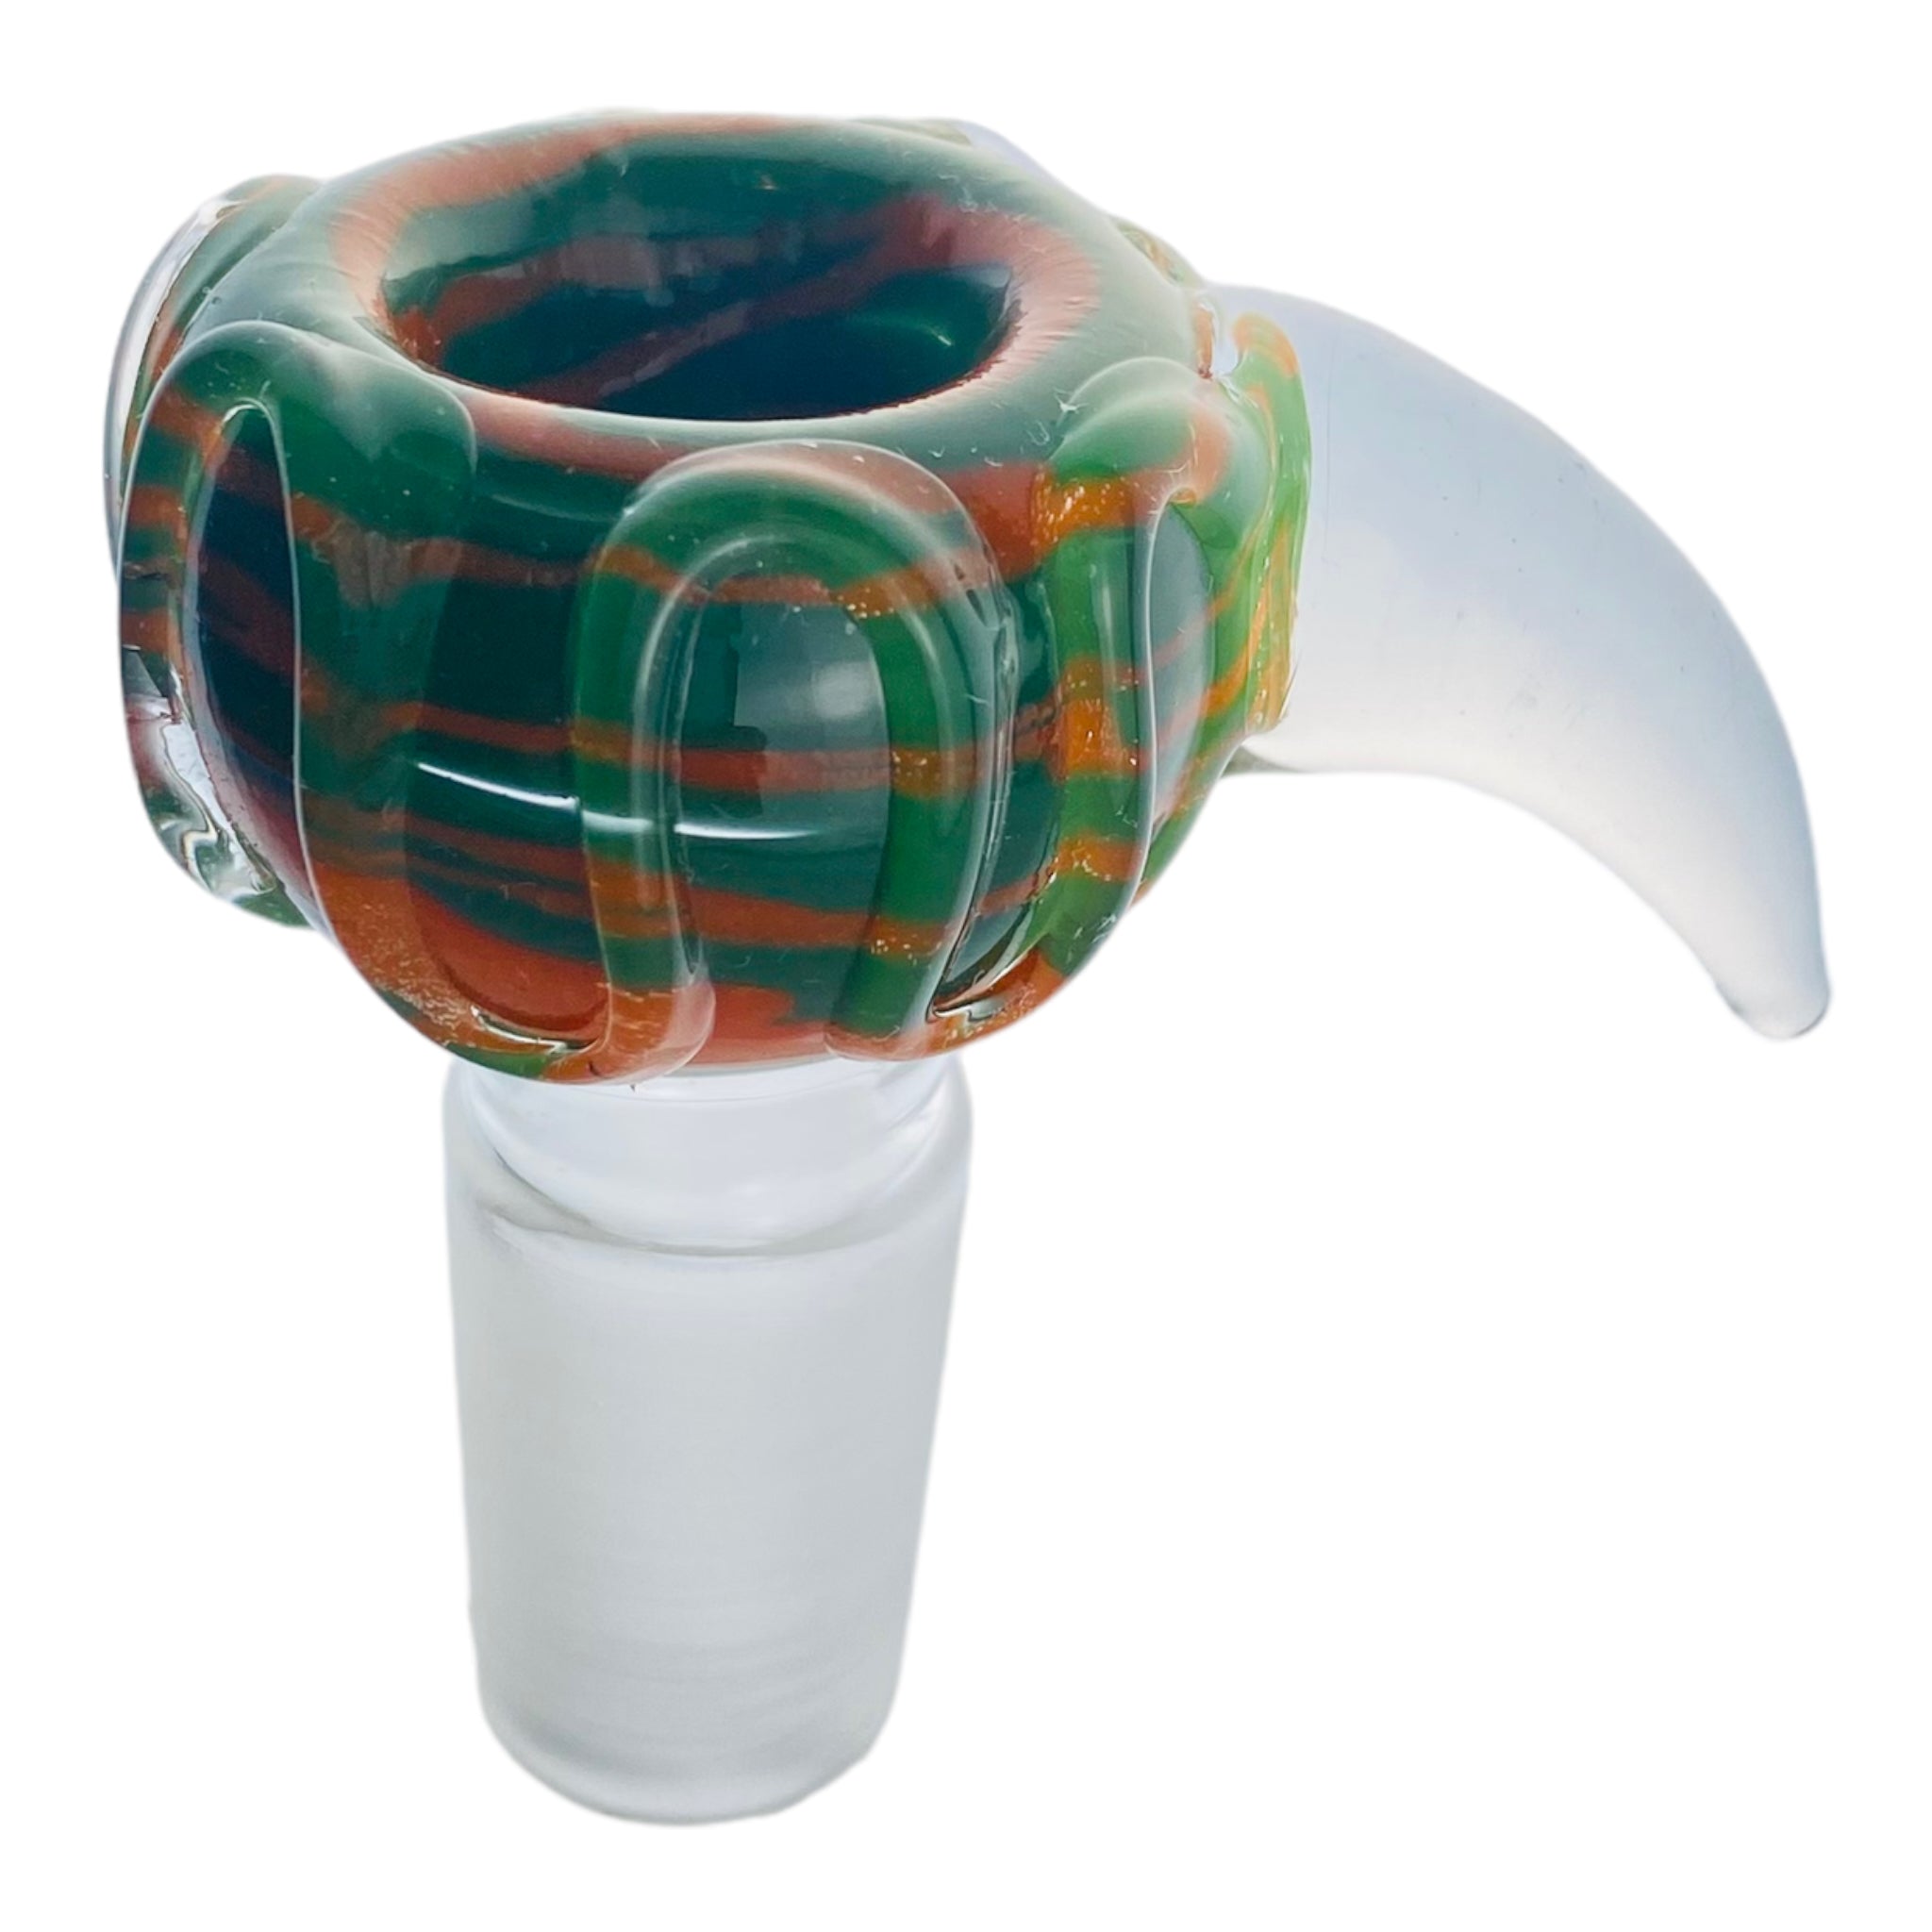 18mm Flower Bowl - Green And Orange Bubble With Clear Horn Handle Bong Bowl Piece